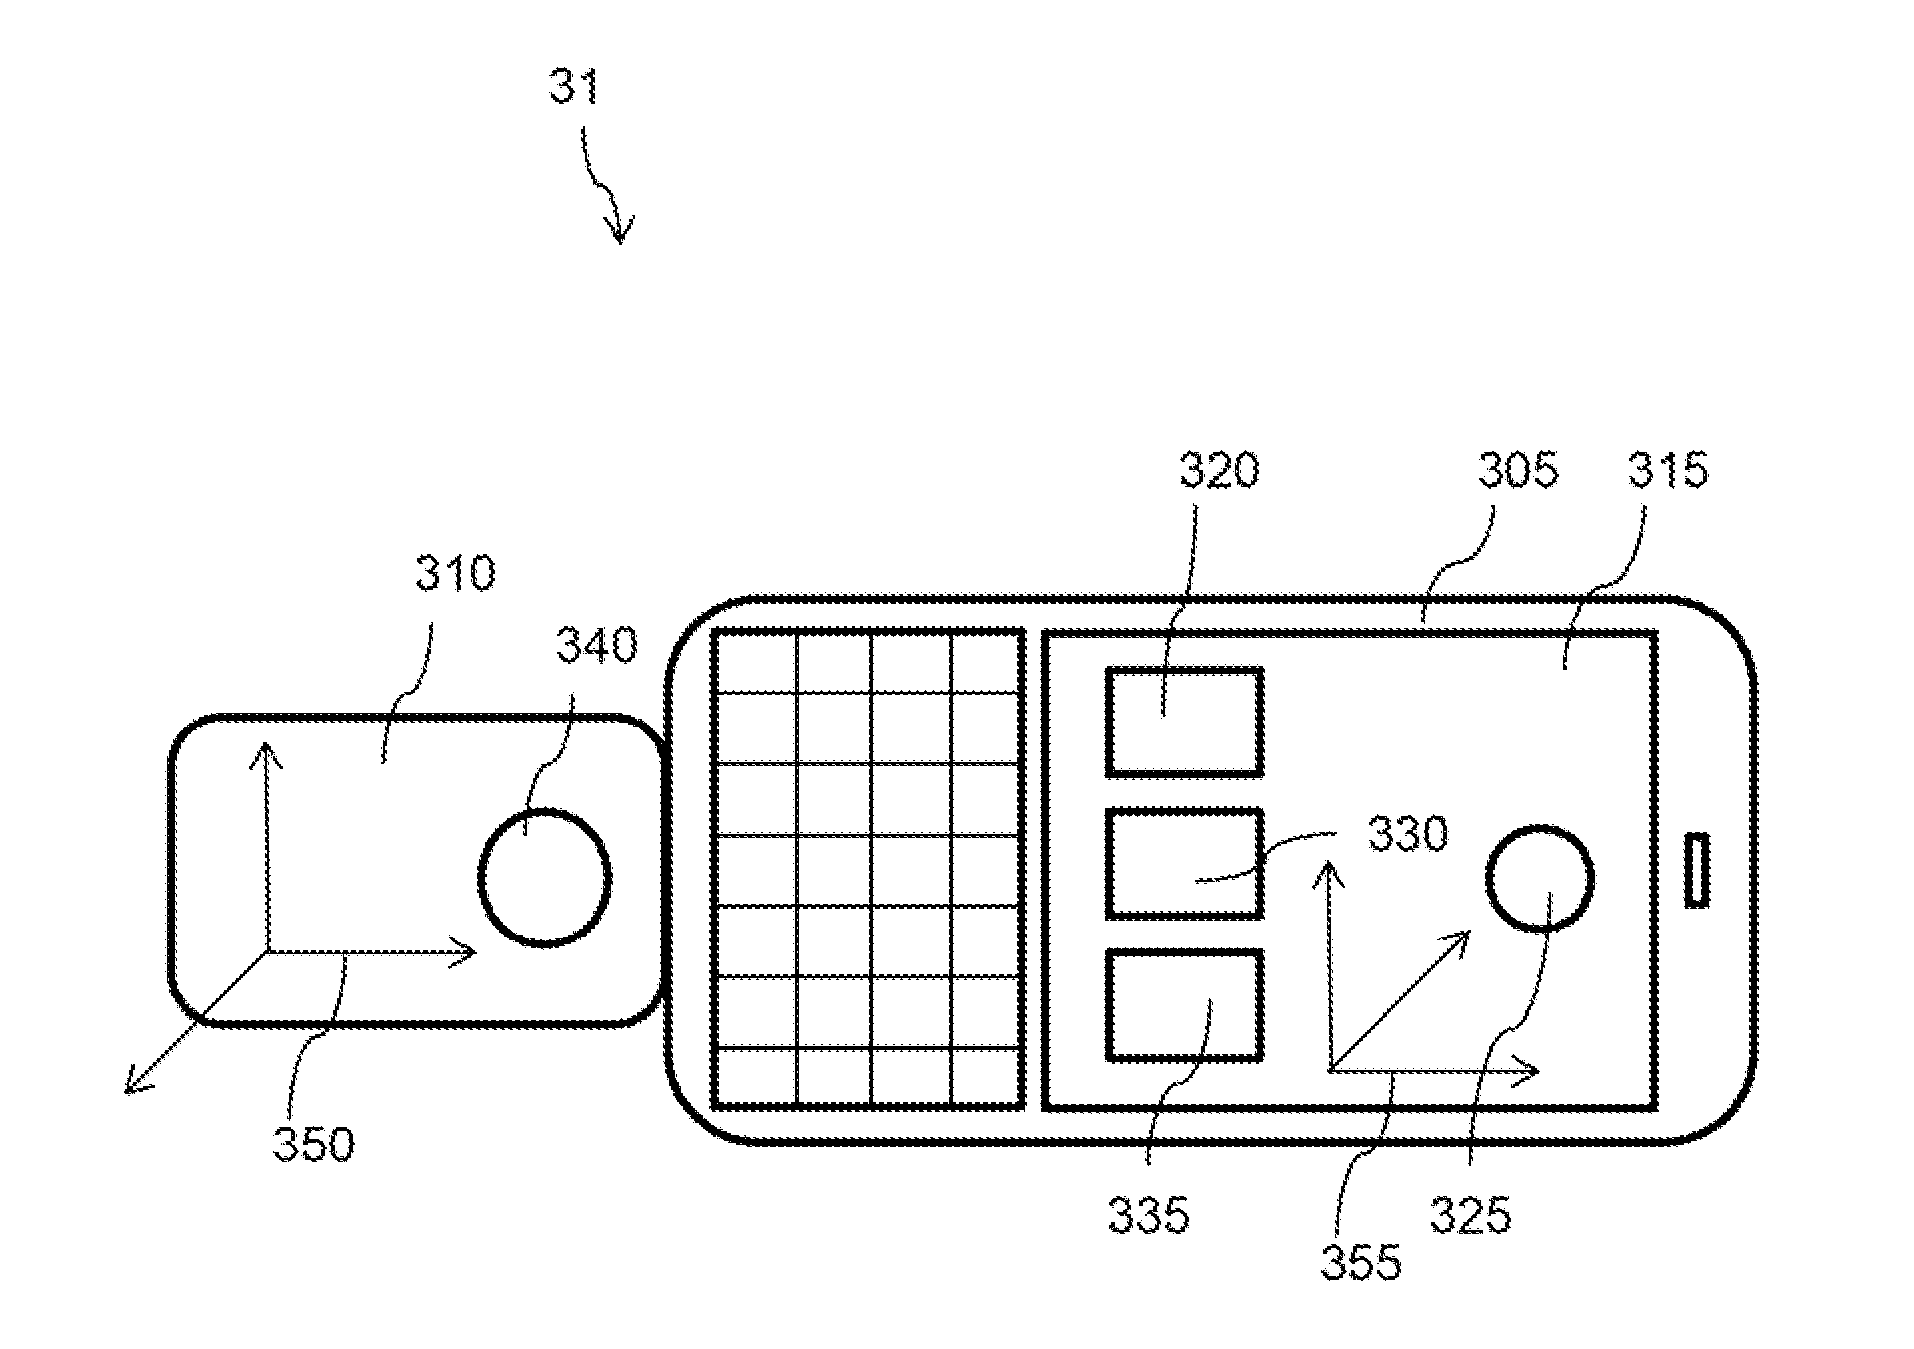 Method and device for producing at least one self-portrait image